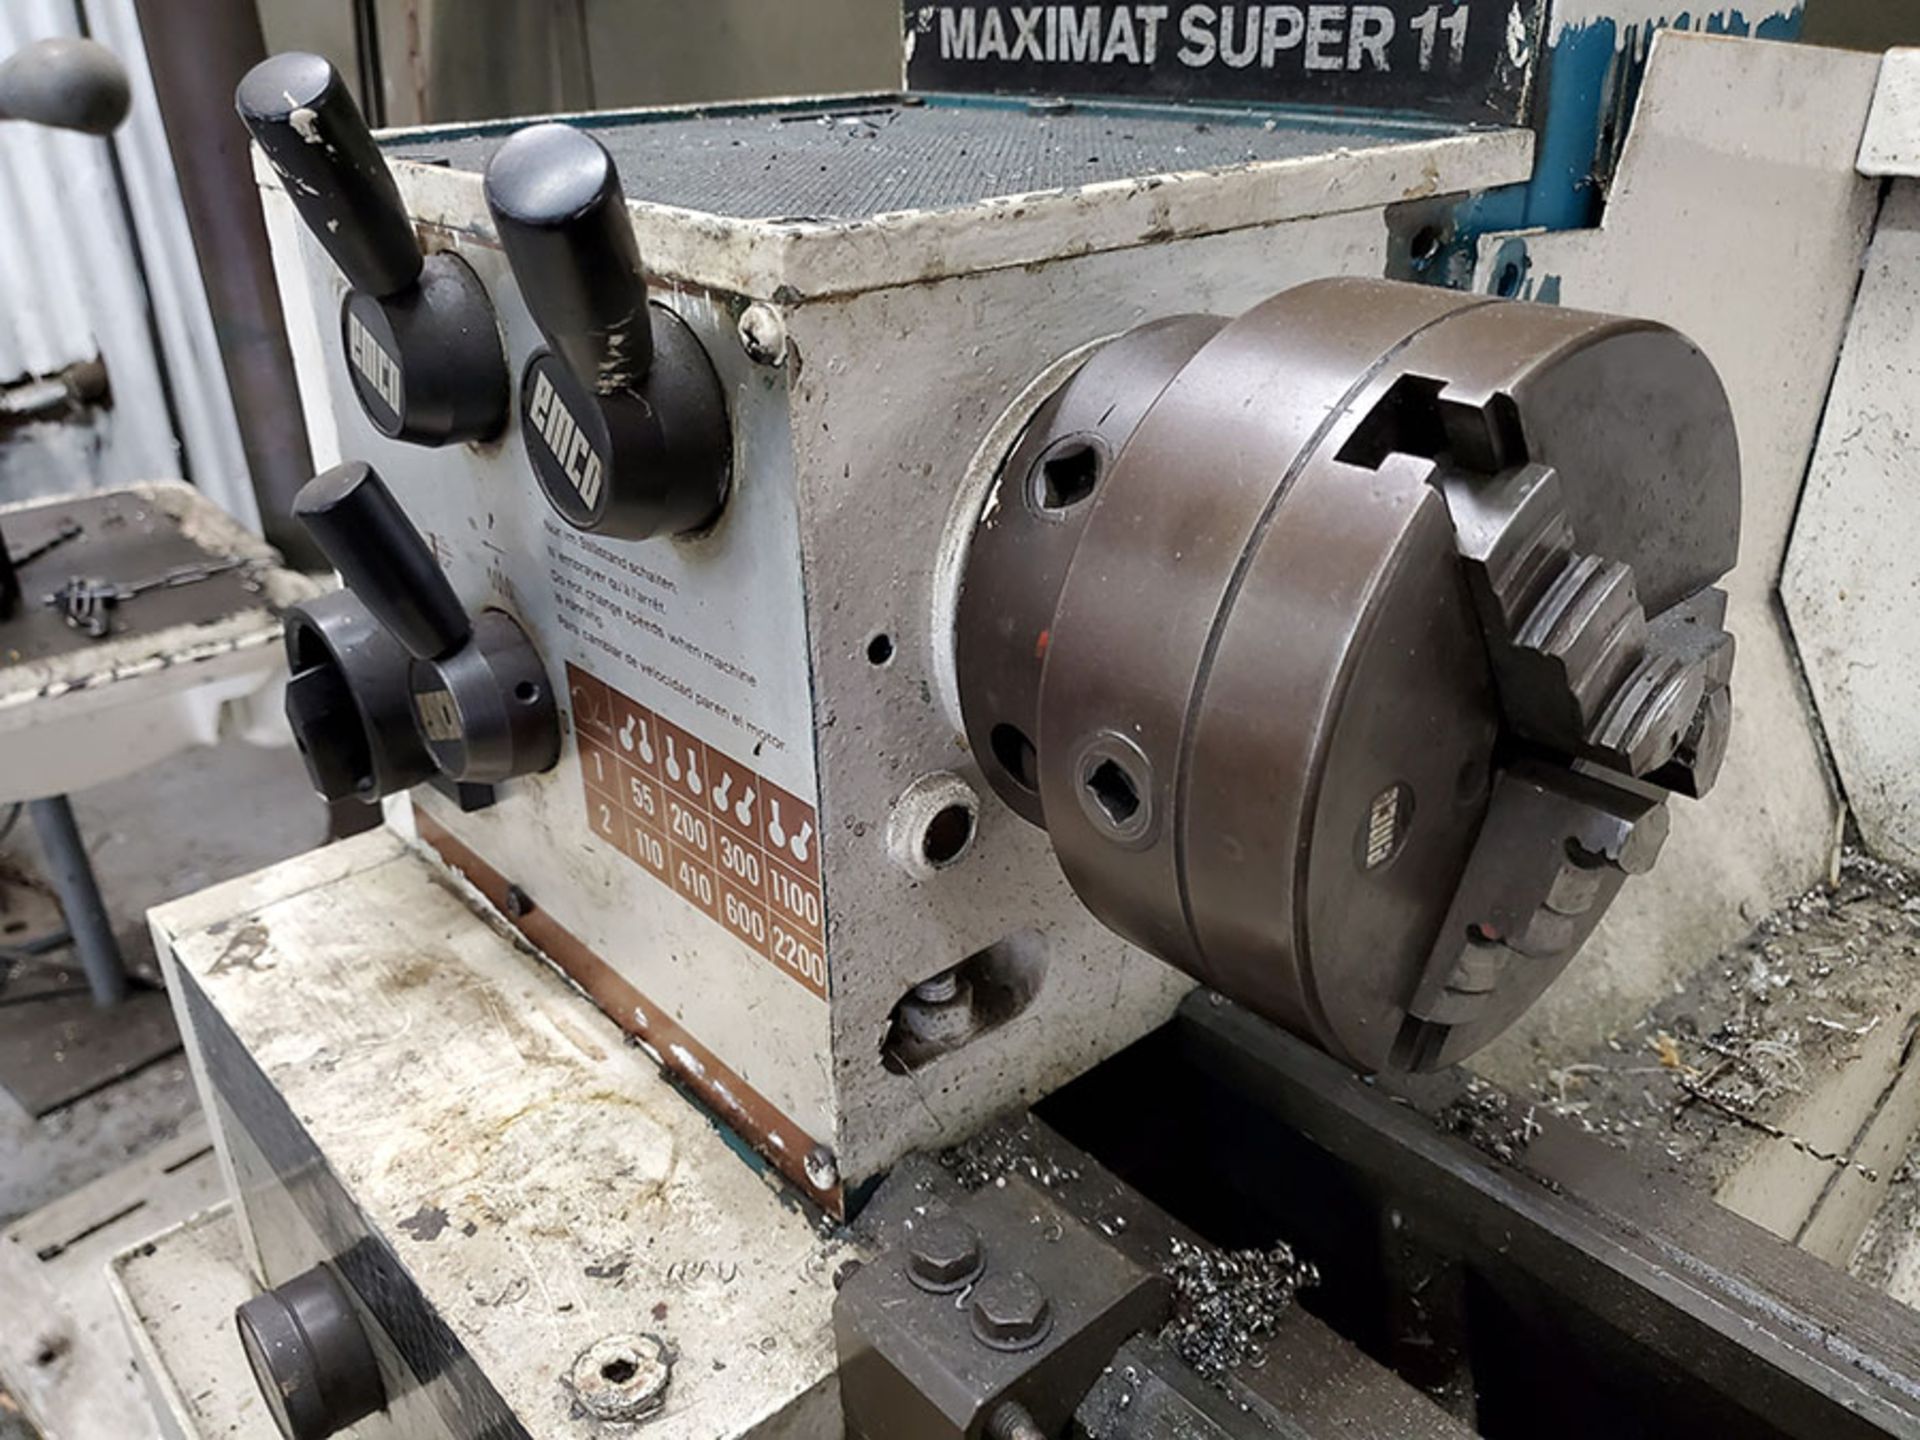 EMCO MAXIMAT SUPER 11 HORIZONTAL ENGINE LATHE, 55-2,200 RPM, 3' BED, 5 1/2’’ 3-JAW CHUCK, TOOL POST, - Image 7 of 9